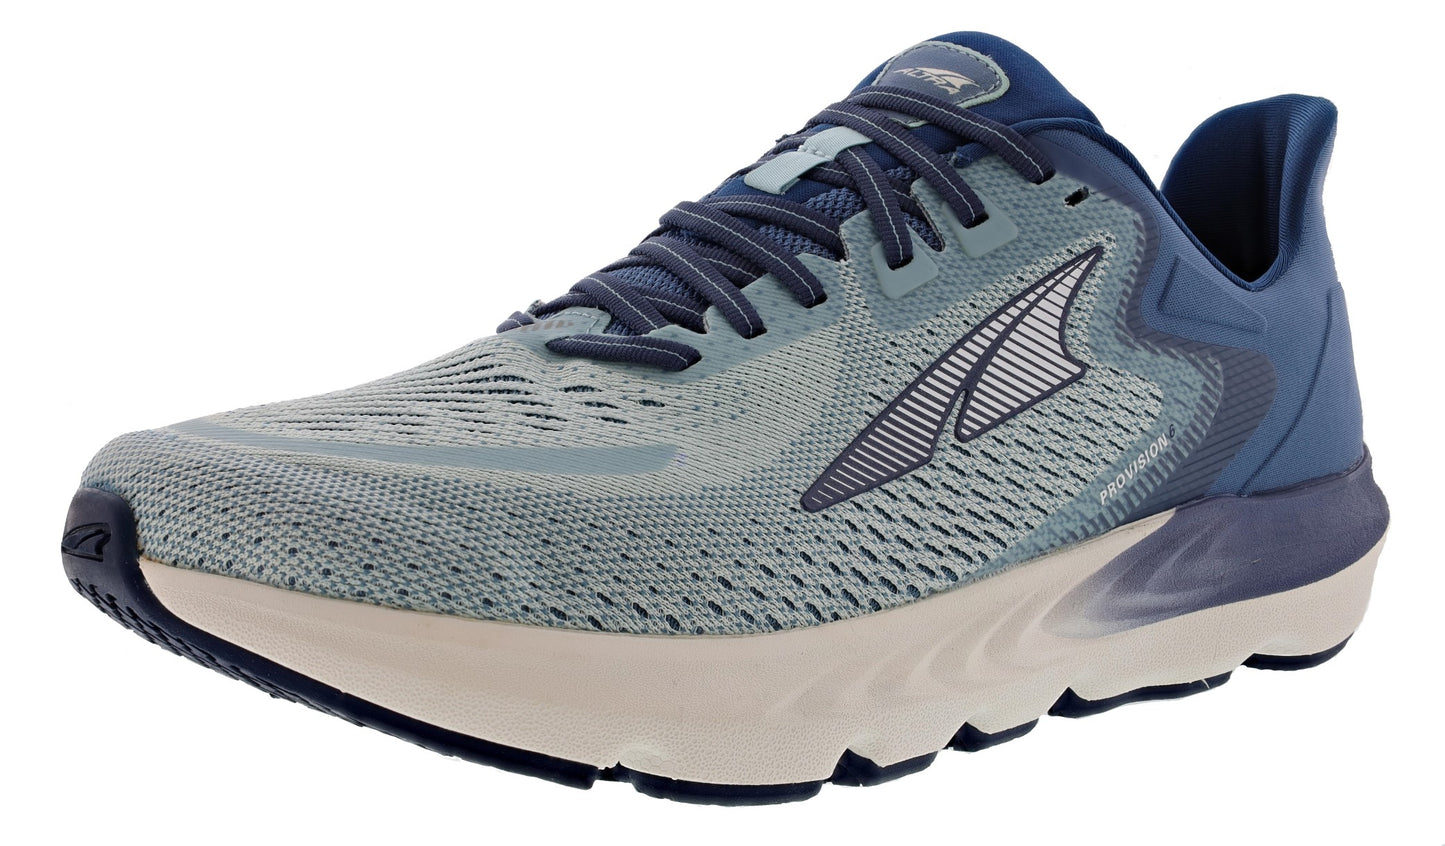 Lateral view of blue Altra Men's Provision 6 Comfort Running Shoes